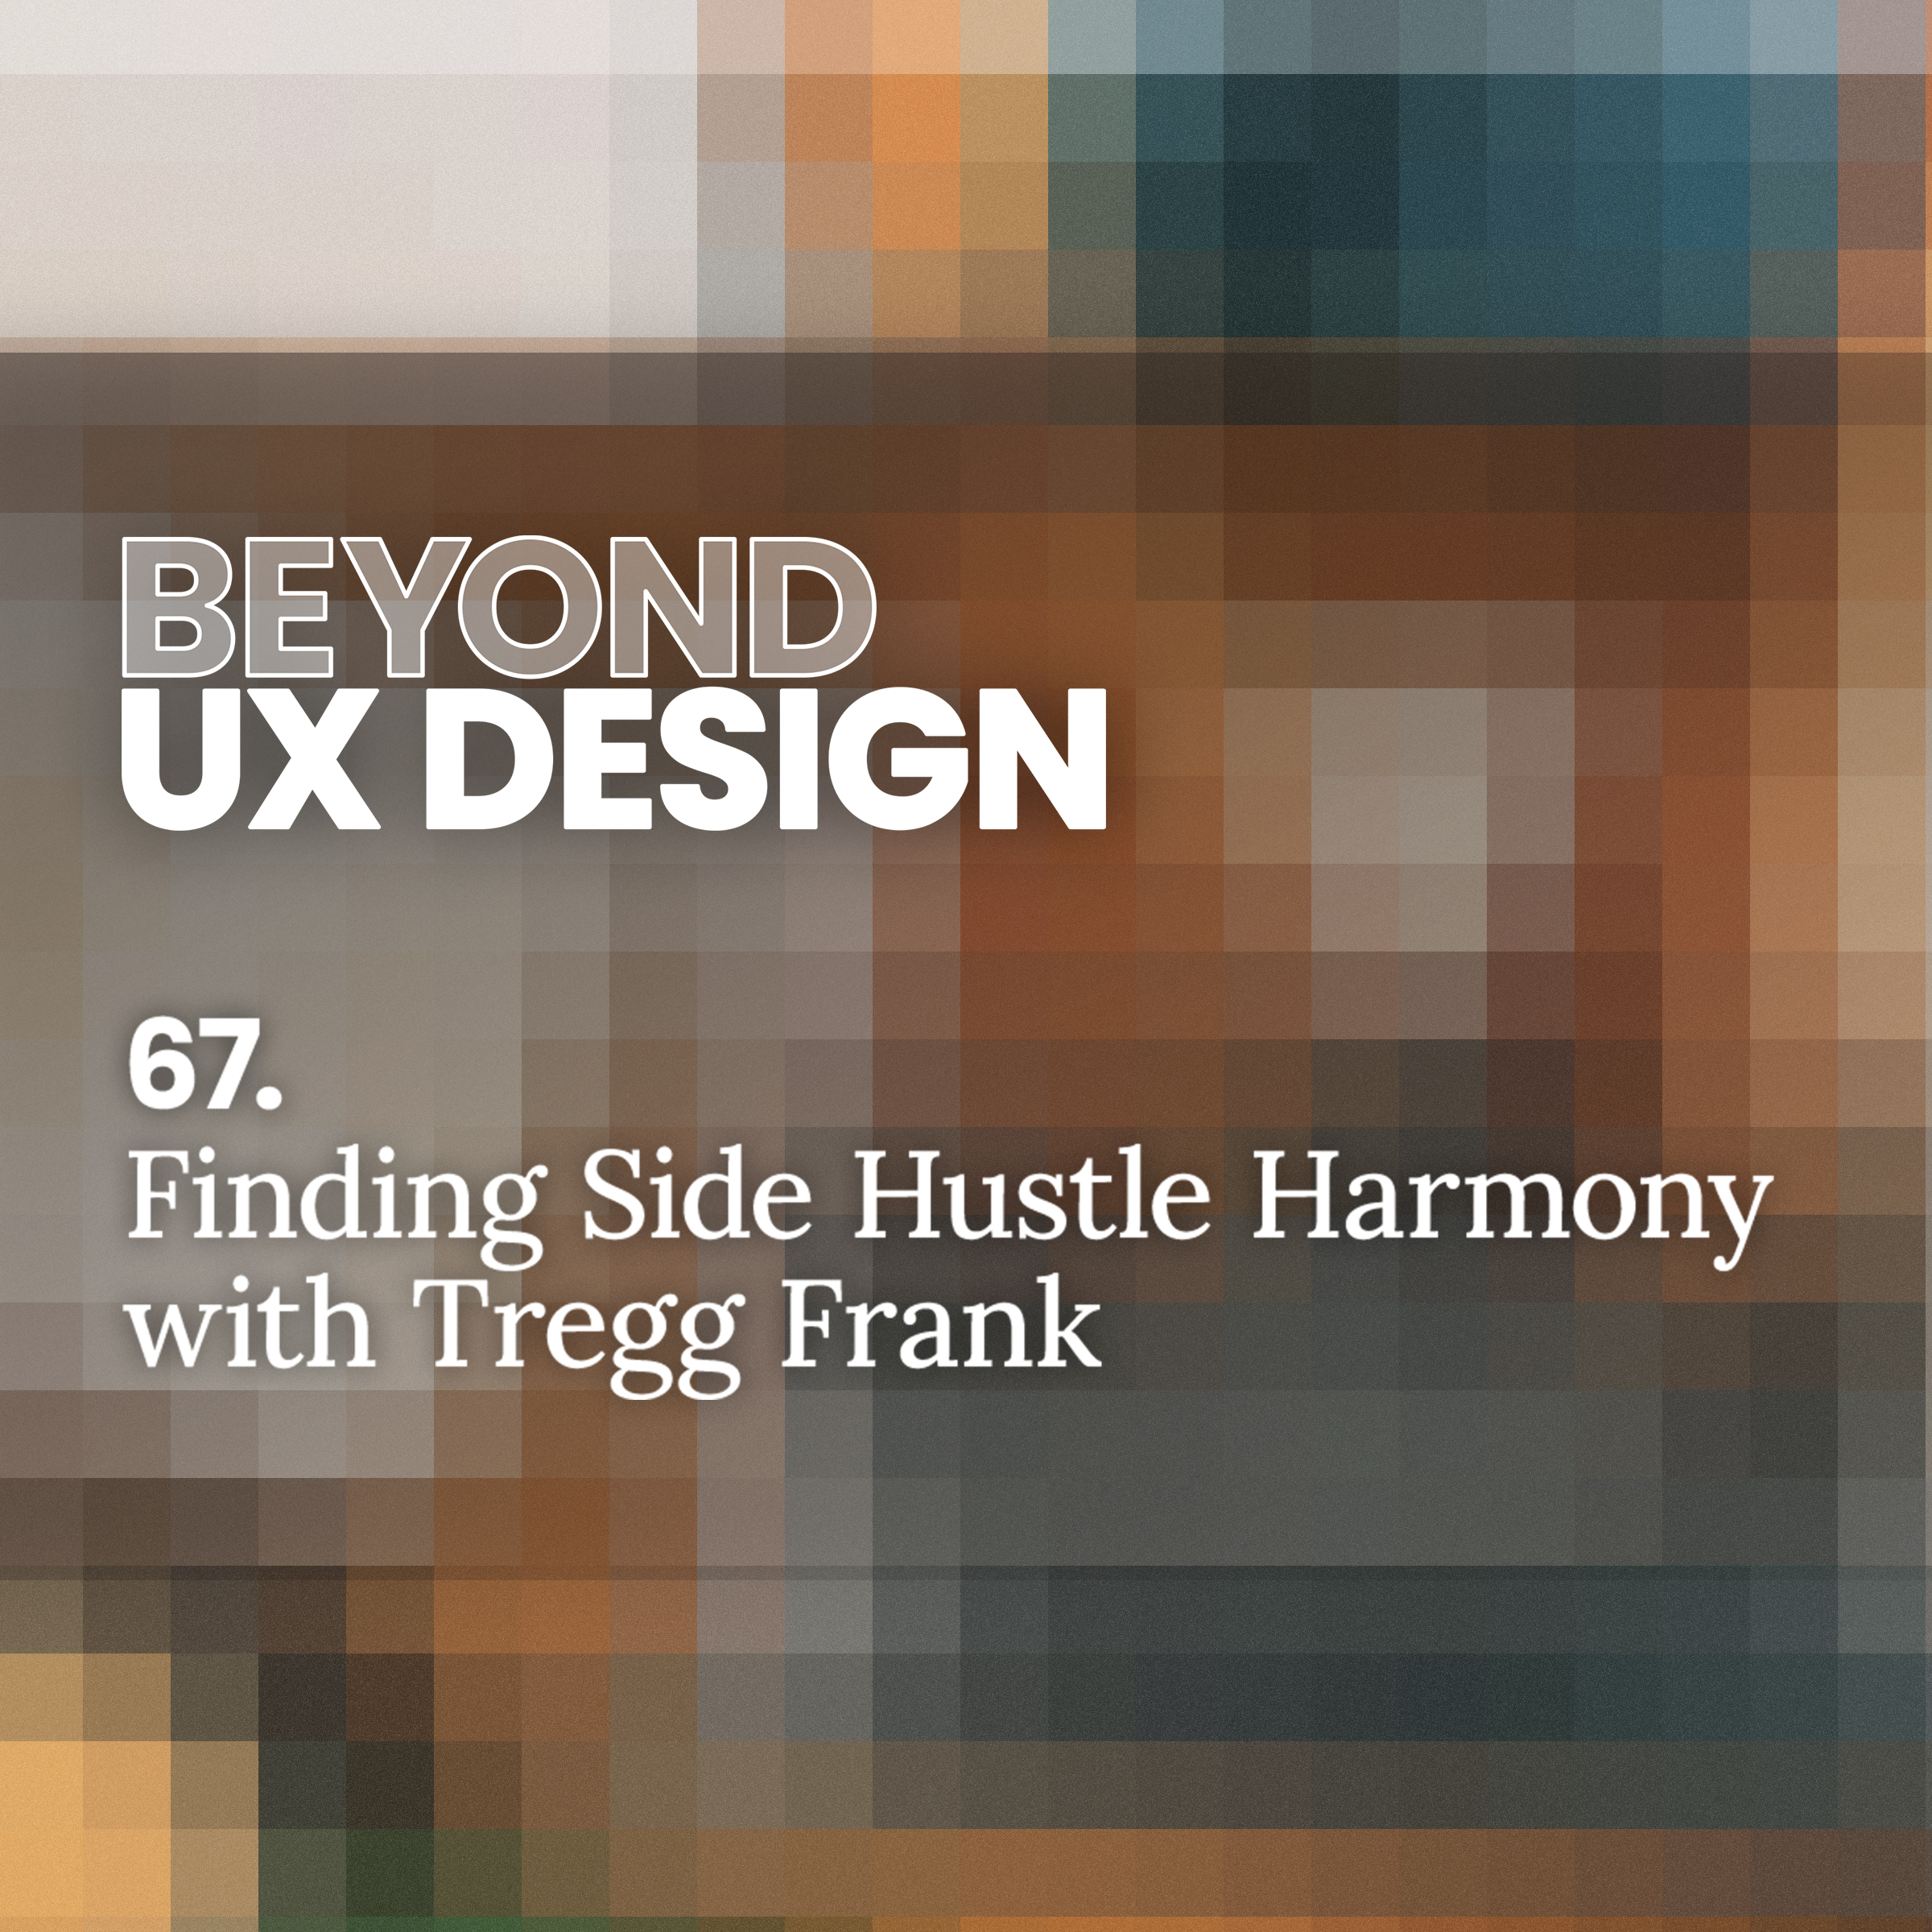 67. Innovation Off the Clock: Finding Side Hustle Harmony with Tregg Frank